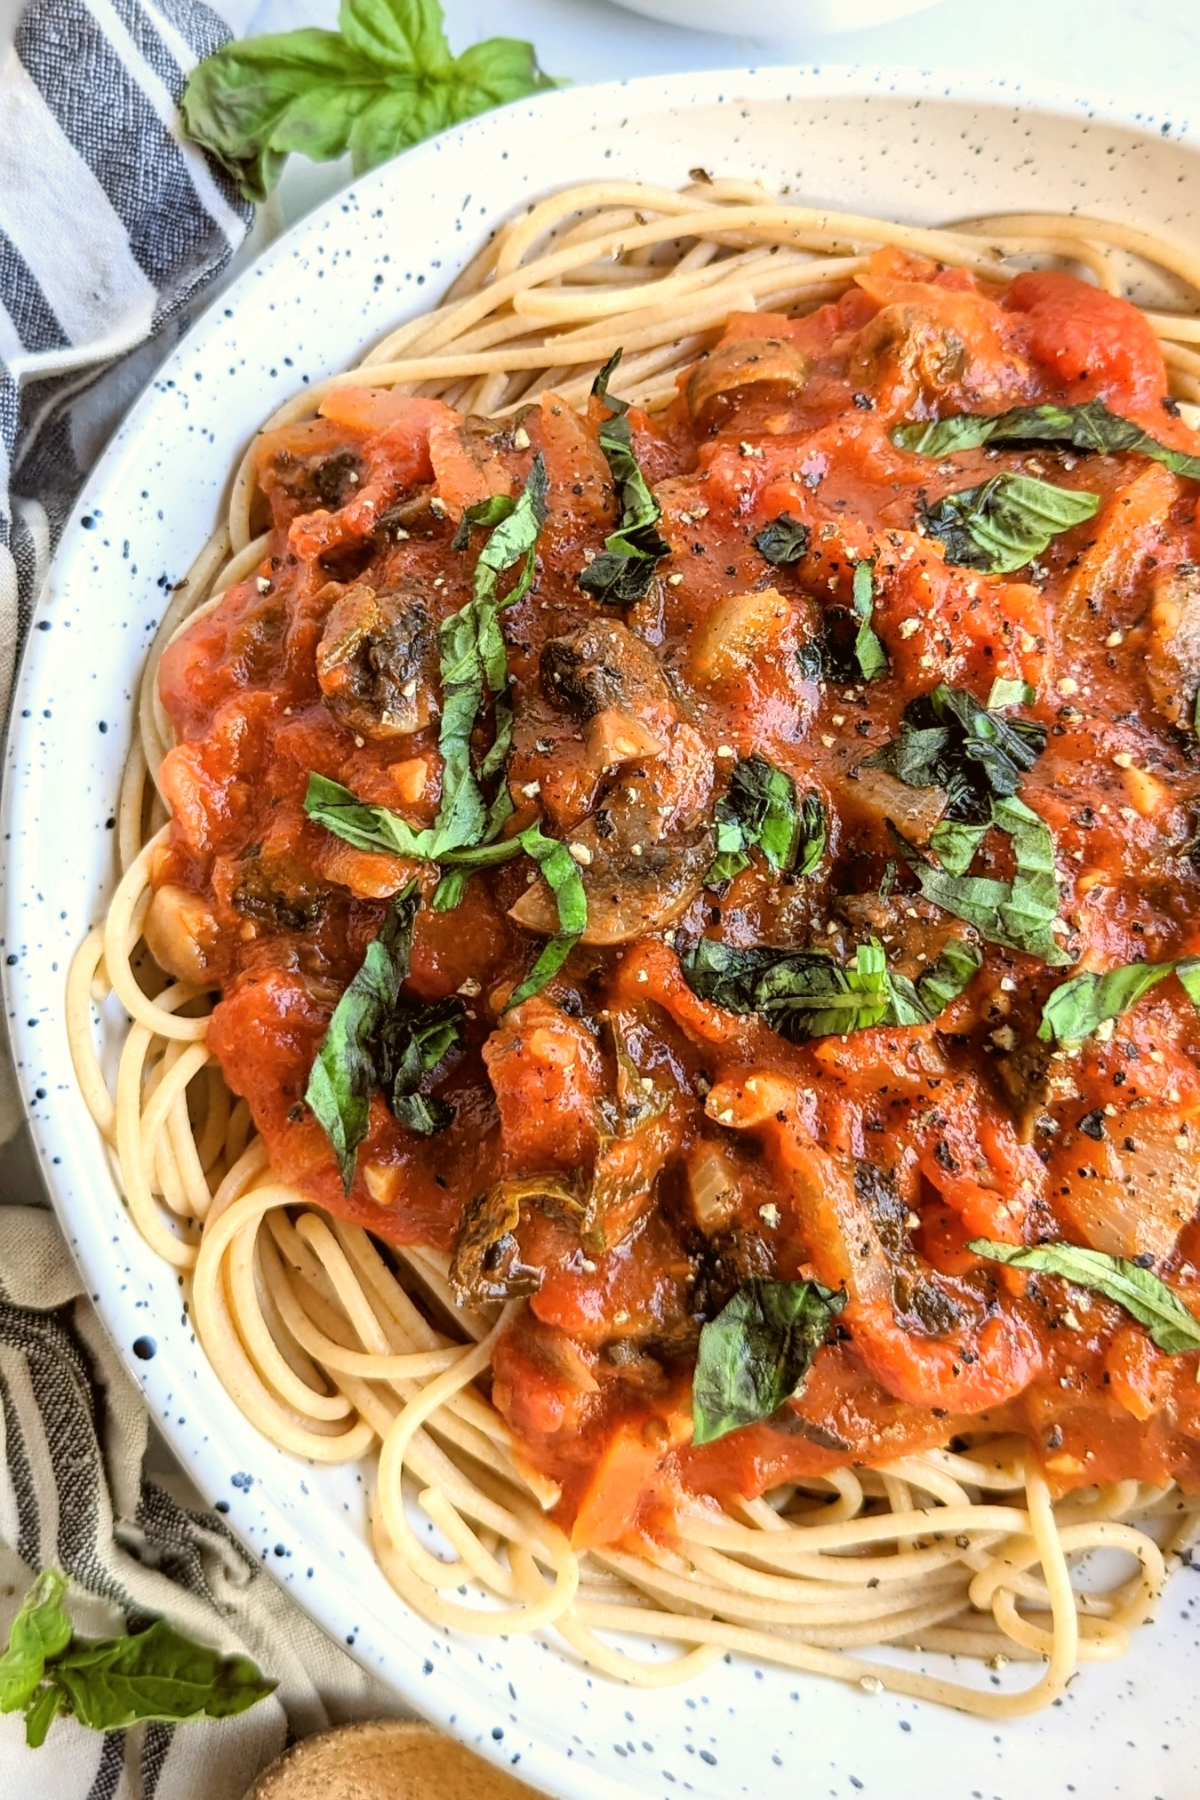 mushroom tomato sauce for pasta healthy pasta sauce with tomatoes butter olive oil garlic basil calabrian chili peppers and optional parmesan cheese